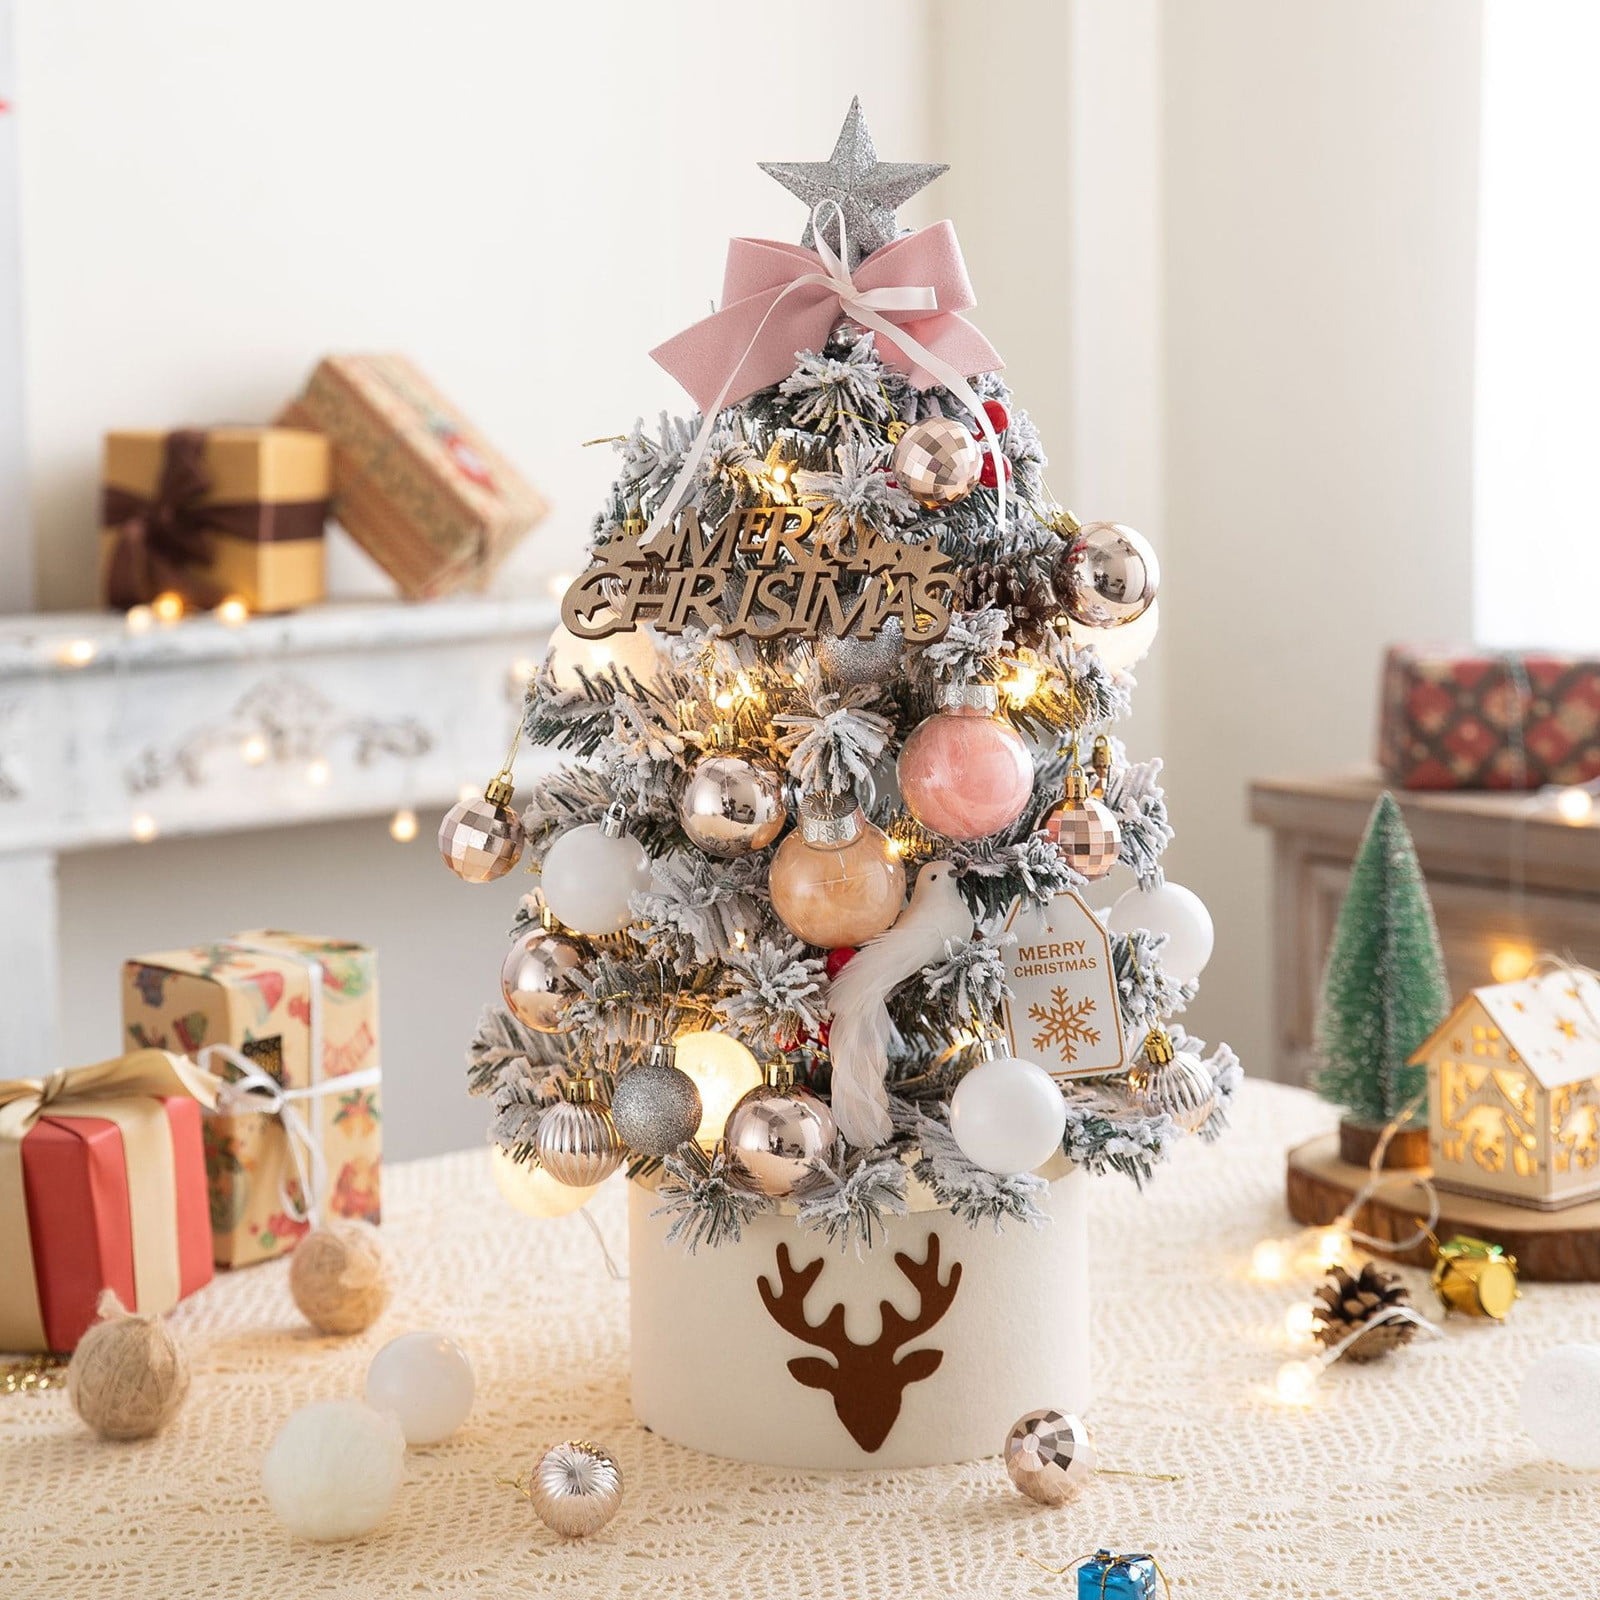 10 Fashionable Christmas Tree Toppers for the Style-Conscious